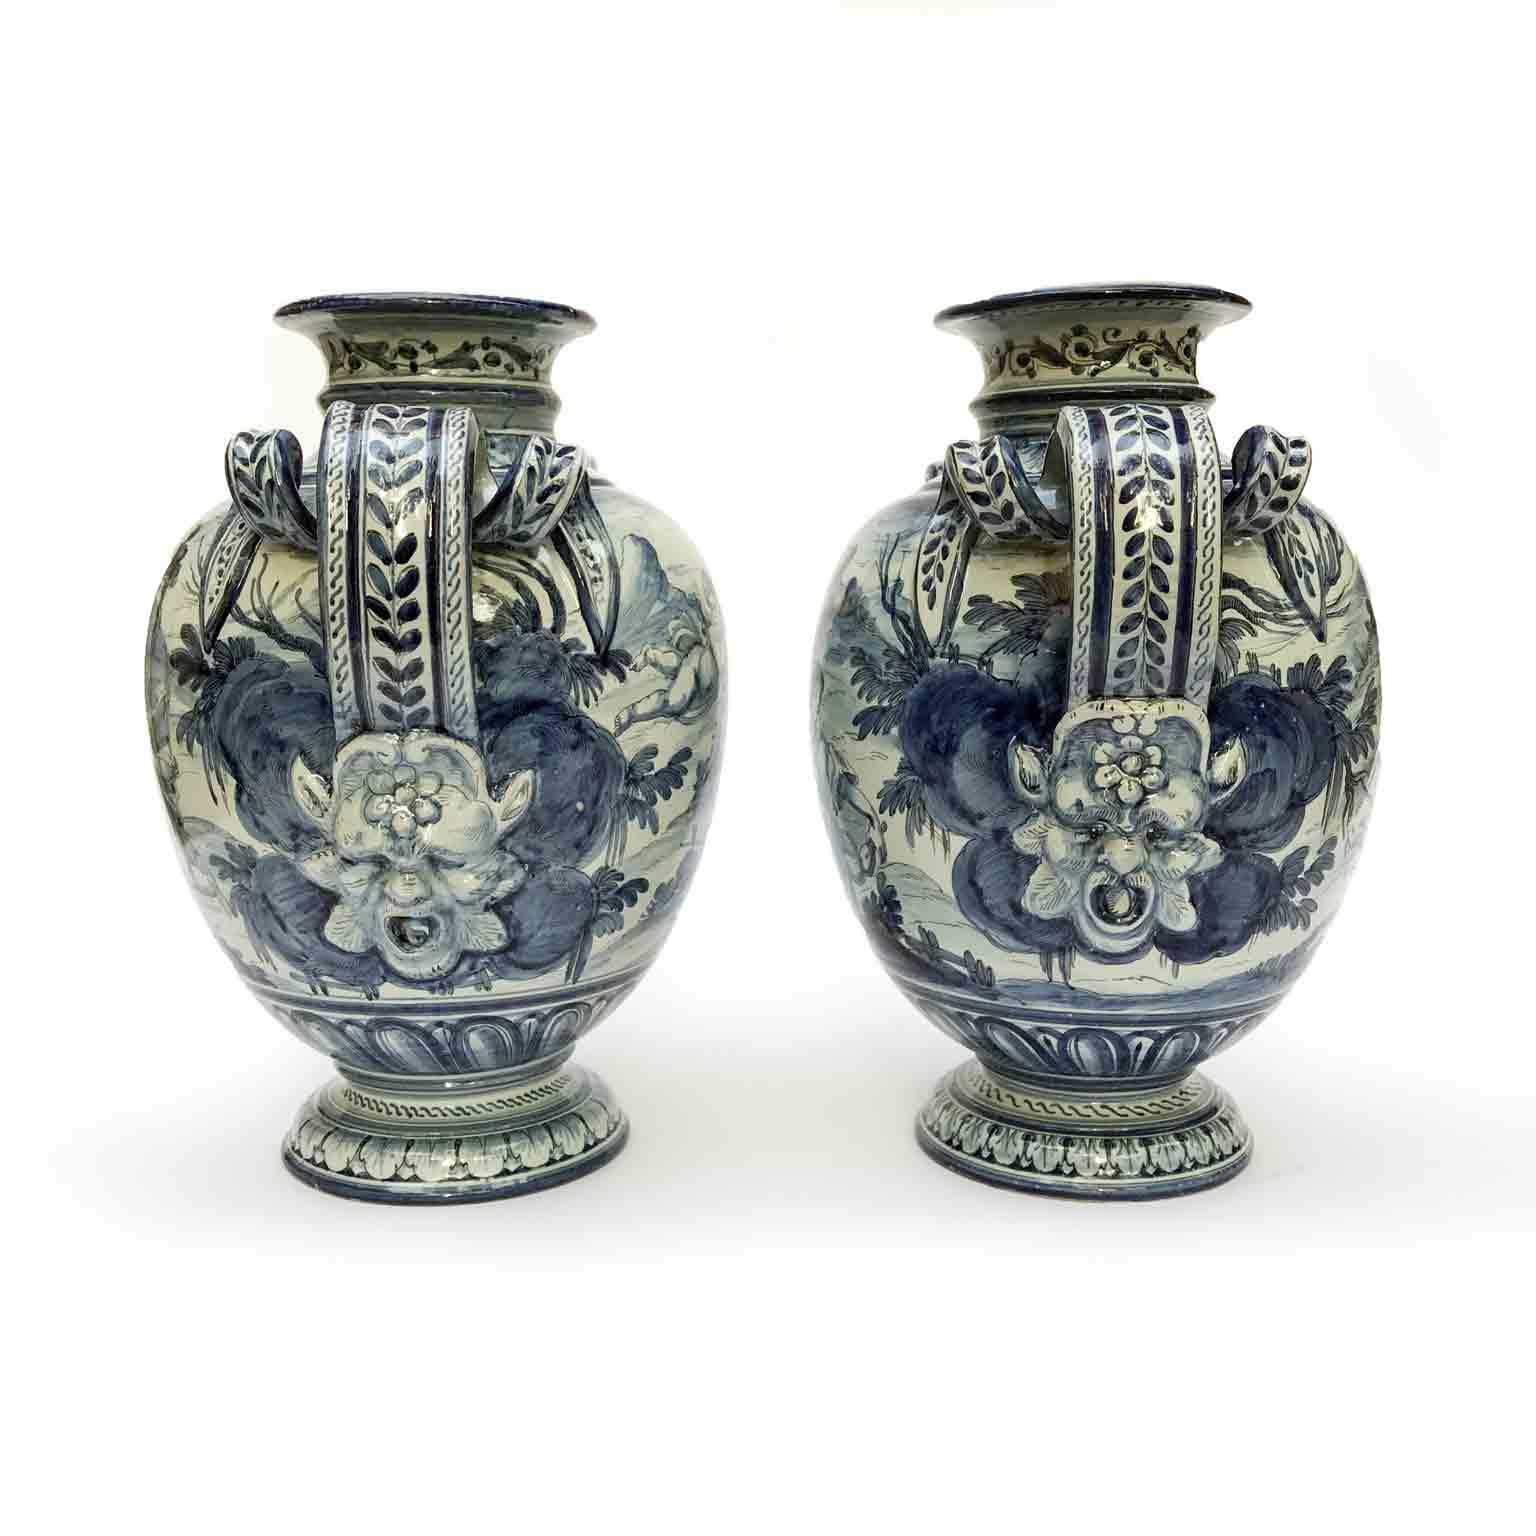 Very decorative pair of blue and white hand-painted vases from the famed Majolica production town of Savona, in Liguria region, Italy. 
Decorated all round with figural scenes with a seated woman and cherubs. Castles and mountains are in the